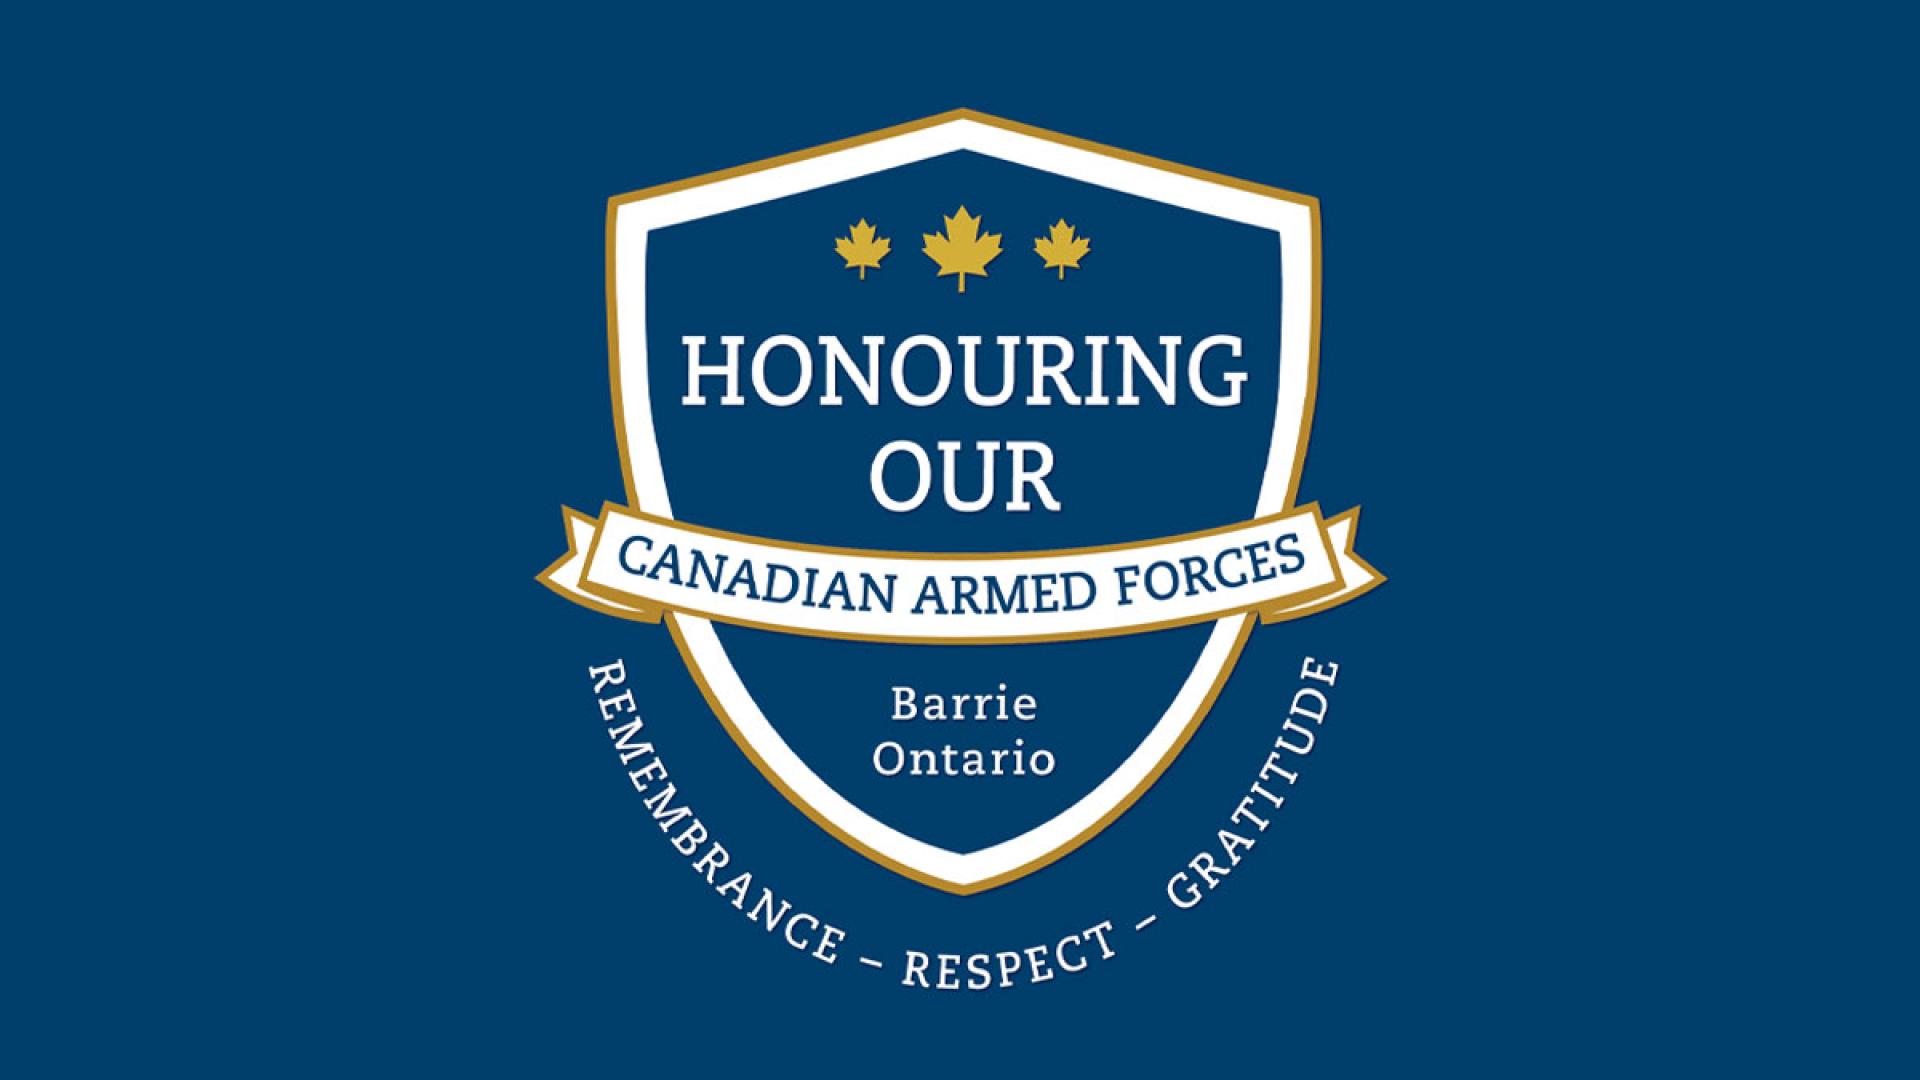 Crest including text: Honouring our Canadian Armed Forces | Barrie, Ontario | Remembrance - Respect - Gratitude